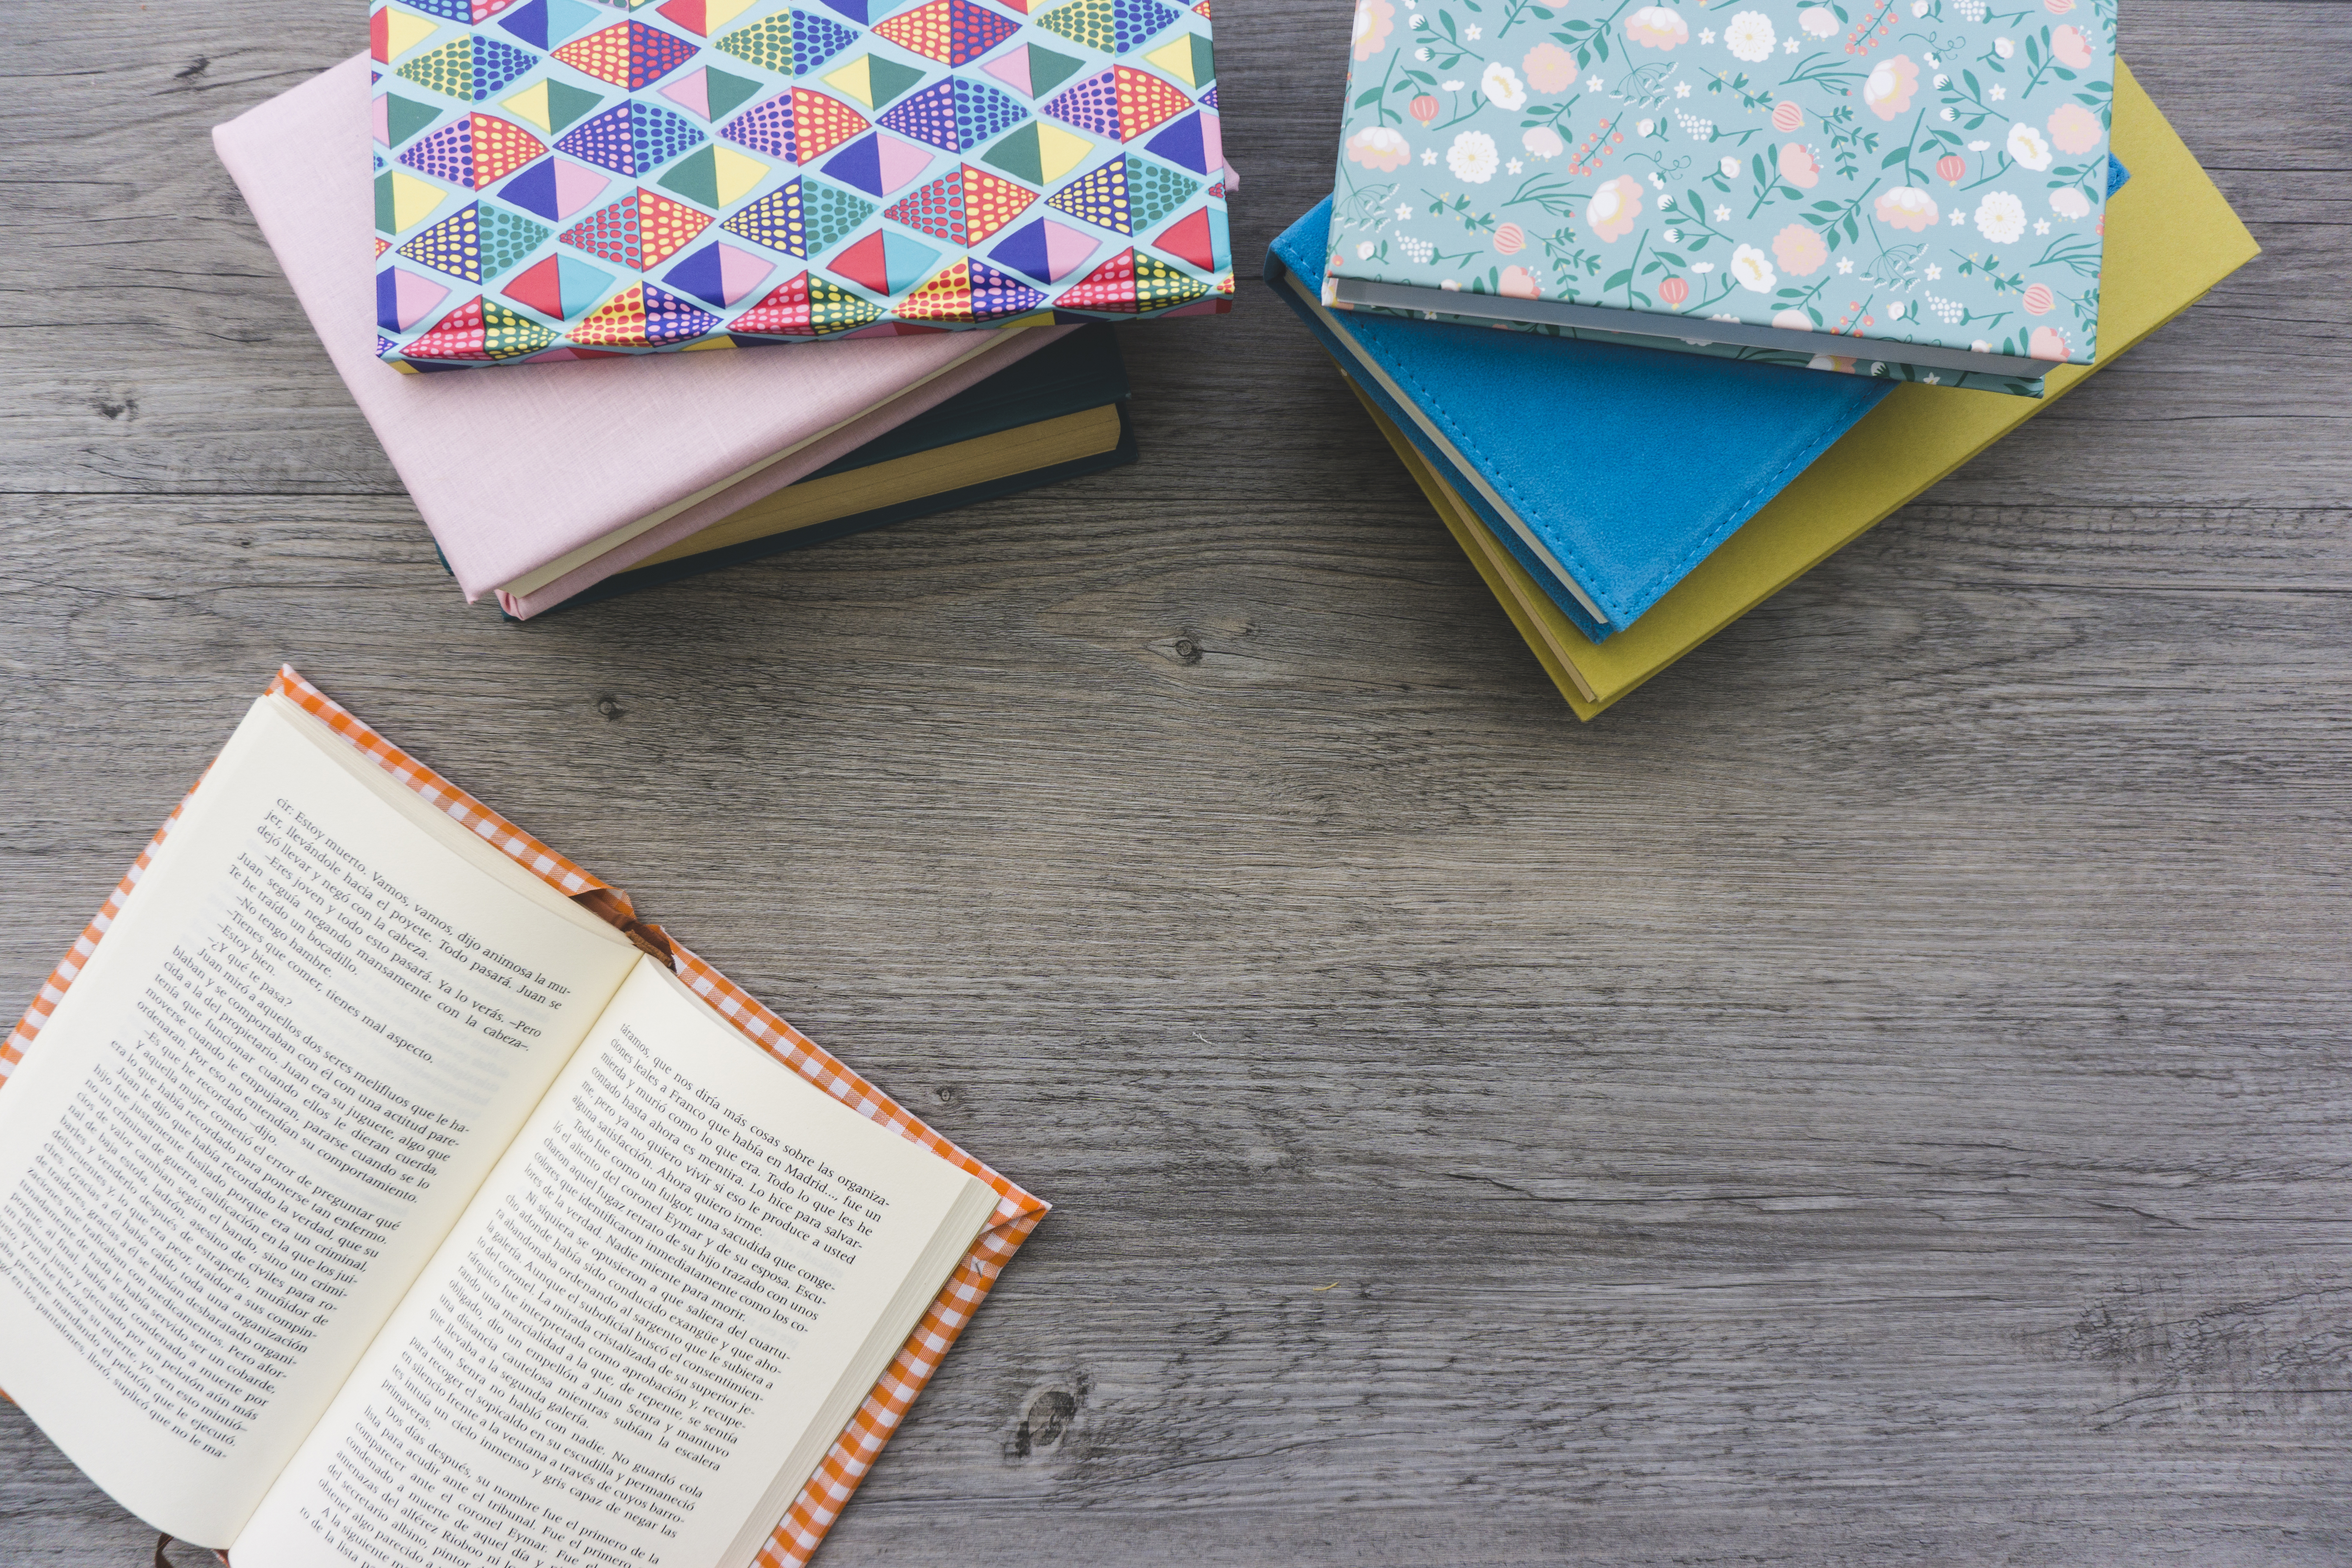 Colorful books stacked on a wooden background. One book is open.